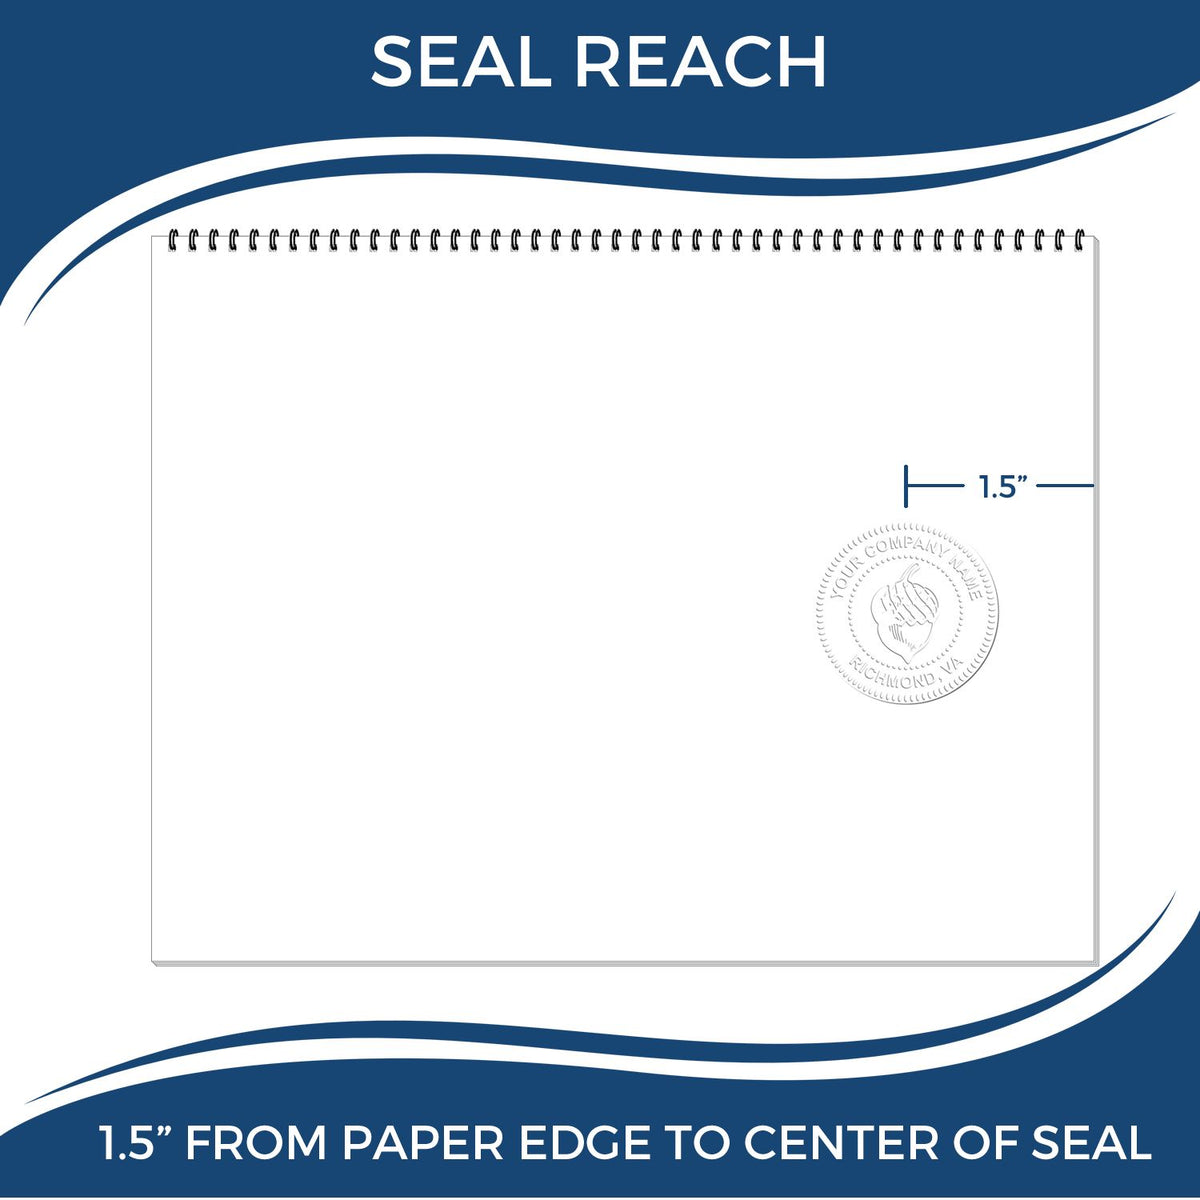 An infographic showing the seal reach which is represented by a ruler and a miniature seal image of the Hybrid Arkansas Engineer Seal